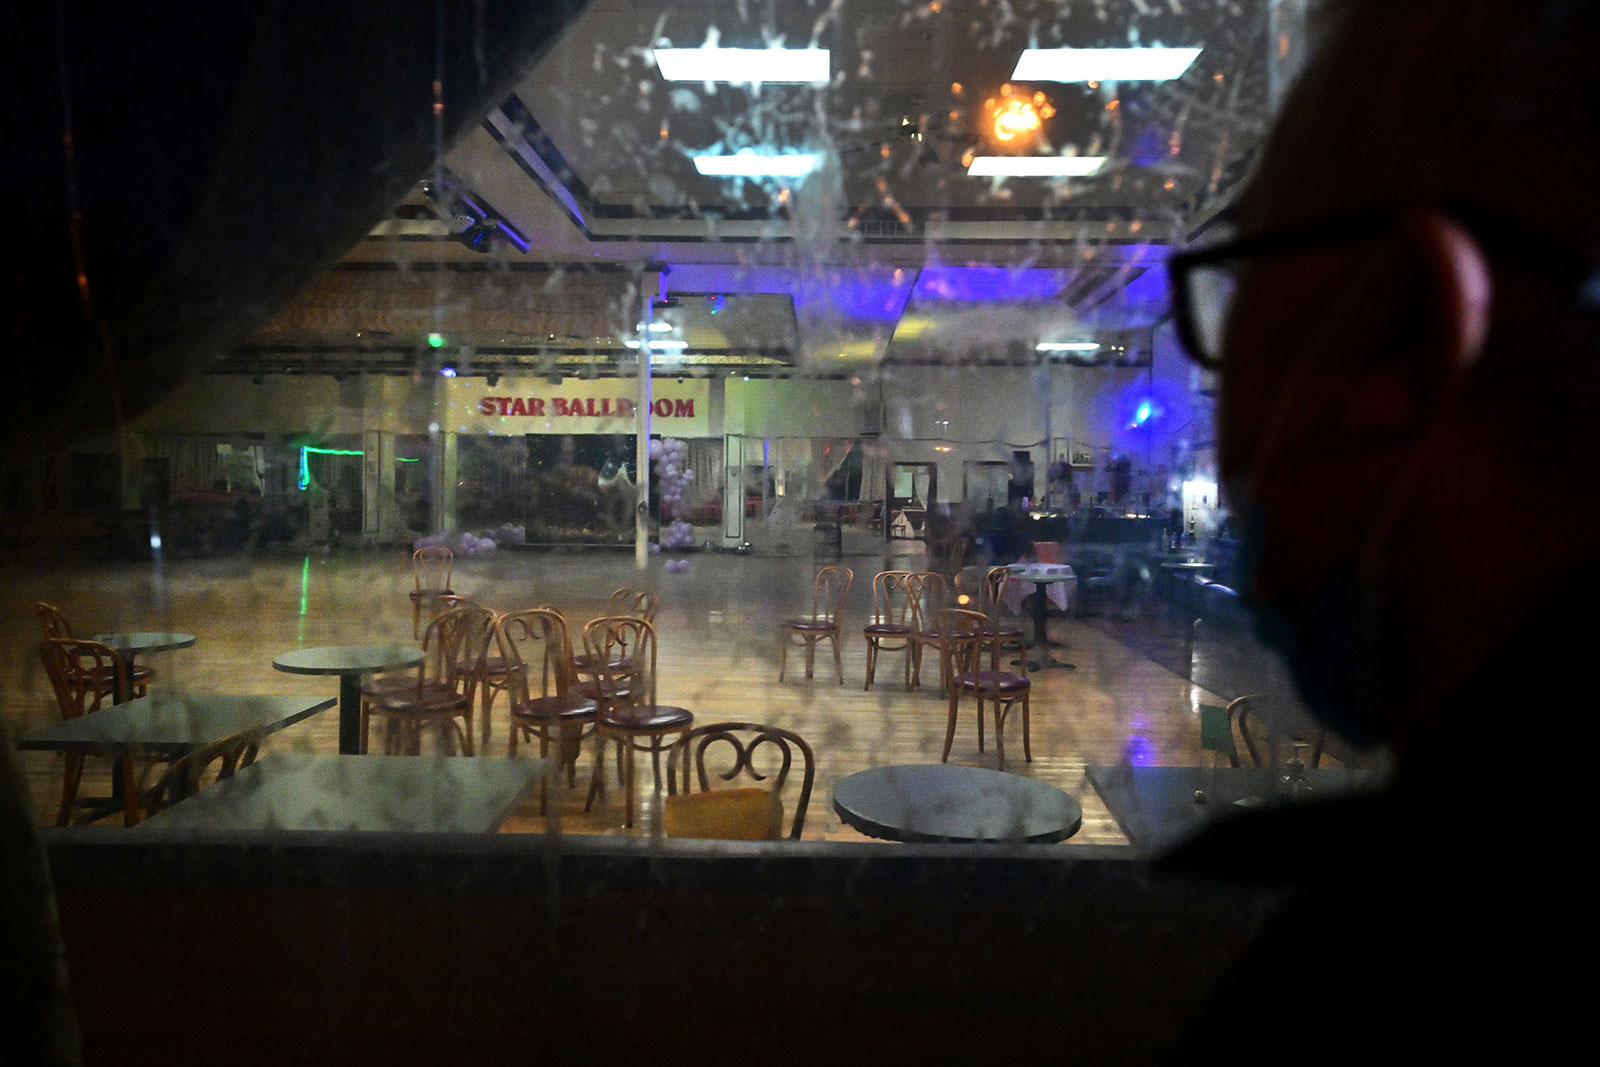 A man takes a closer look through the glass at the interior of the Star Ballroom Dance Studio in Monterey Park Monday evening.